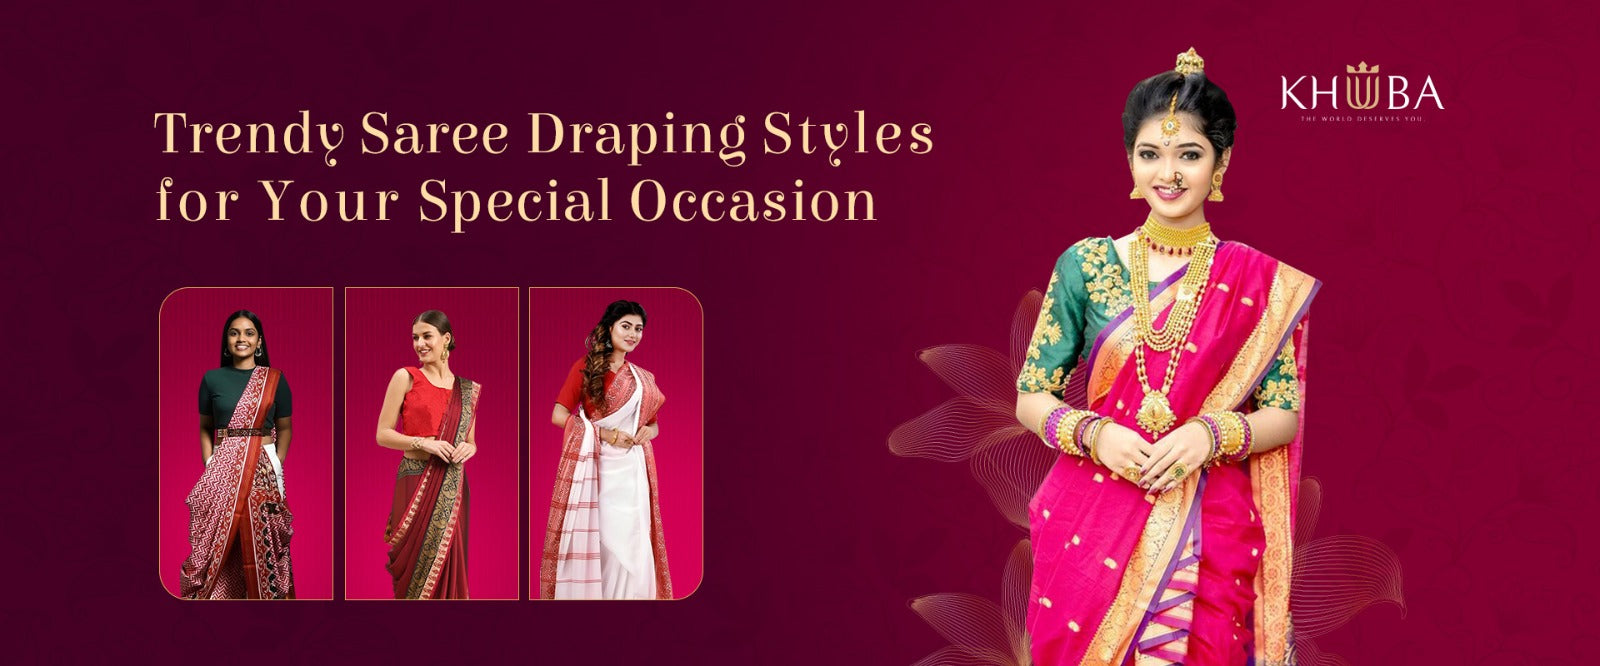 Make A Statement and Look Stunning - Best Saree Style Ideas for